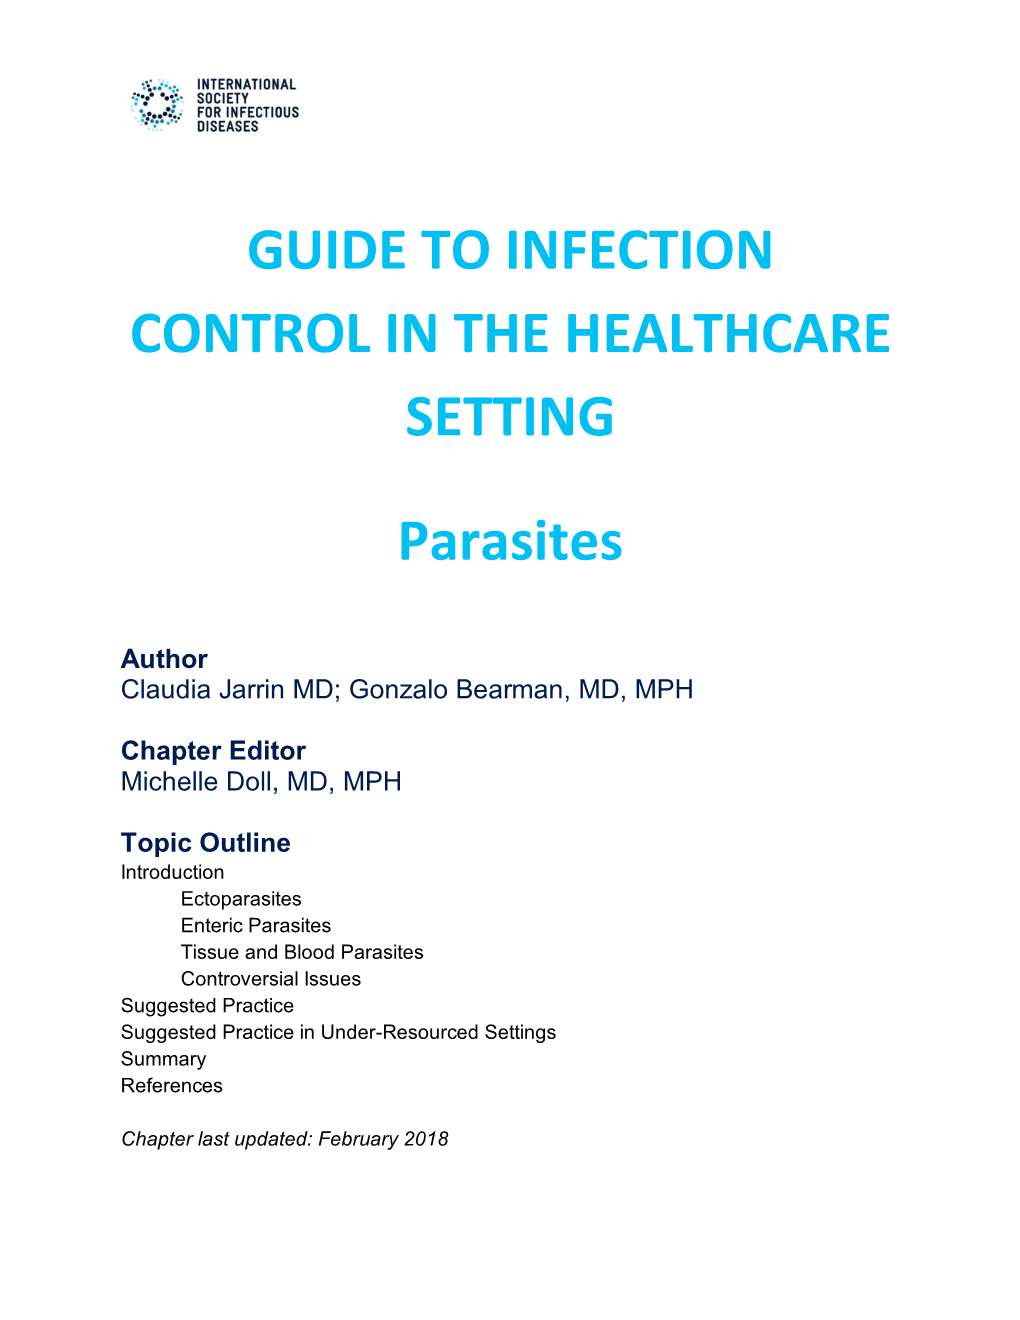 Guide to Infection Control in the Healthcare Setting